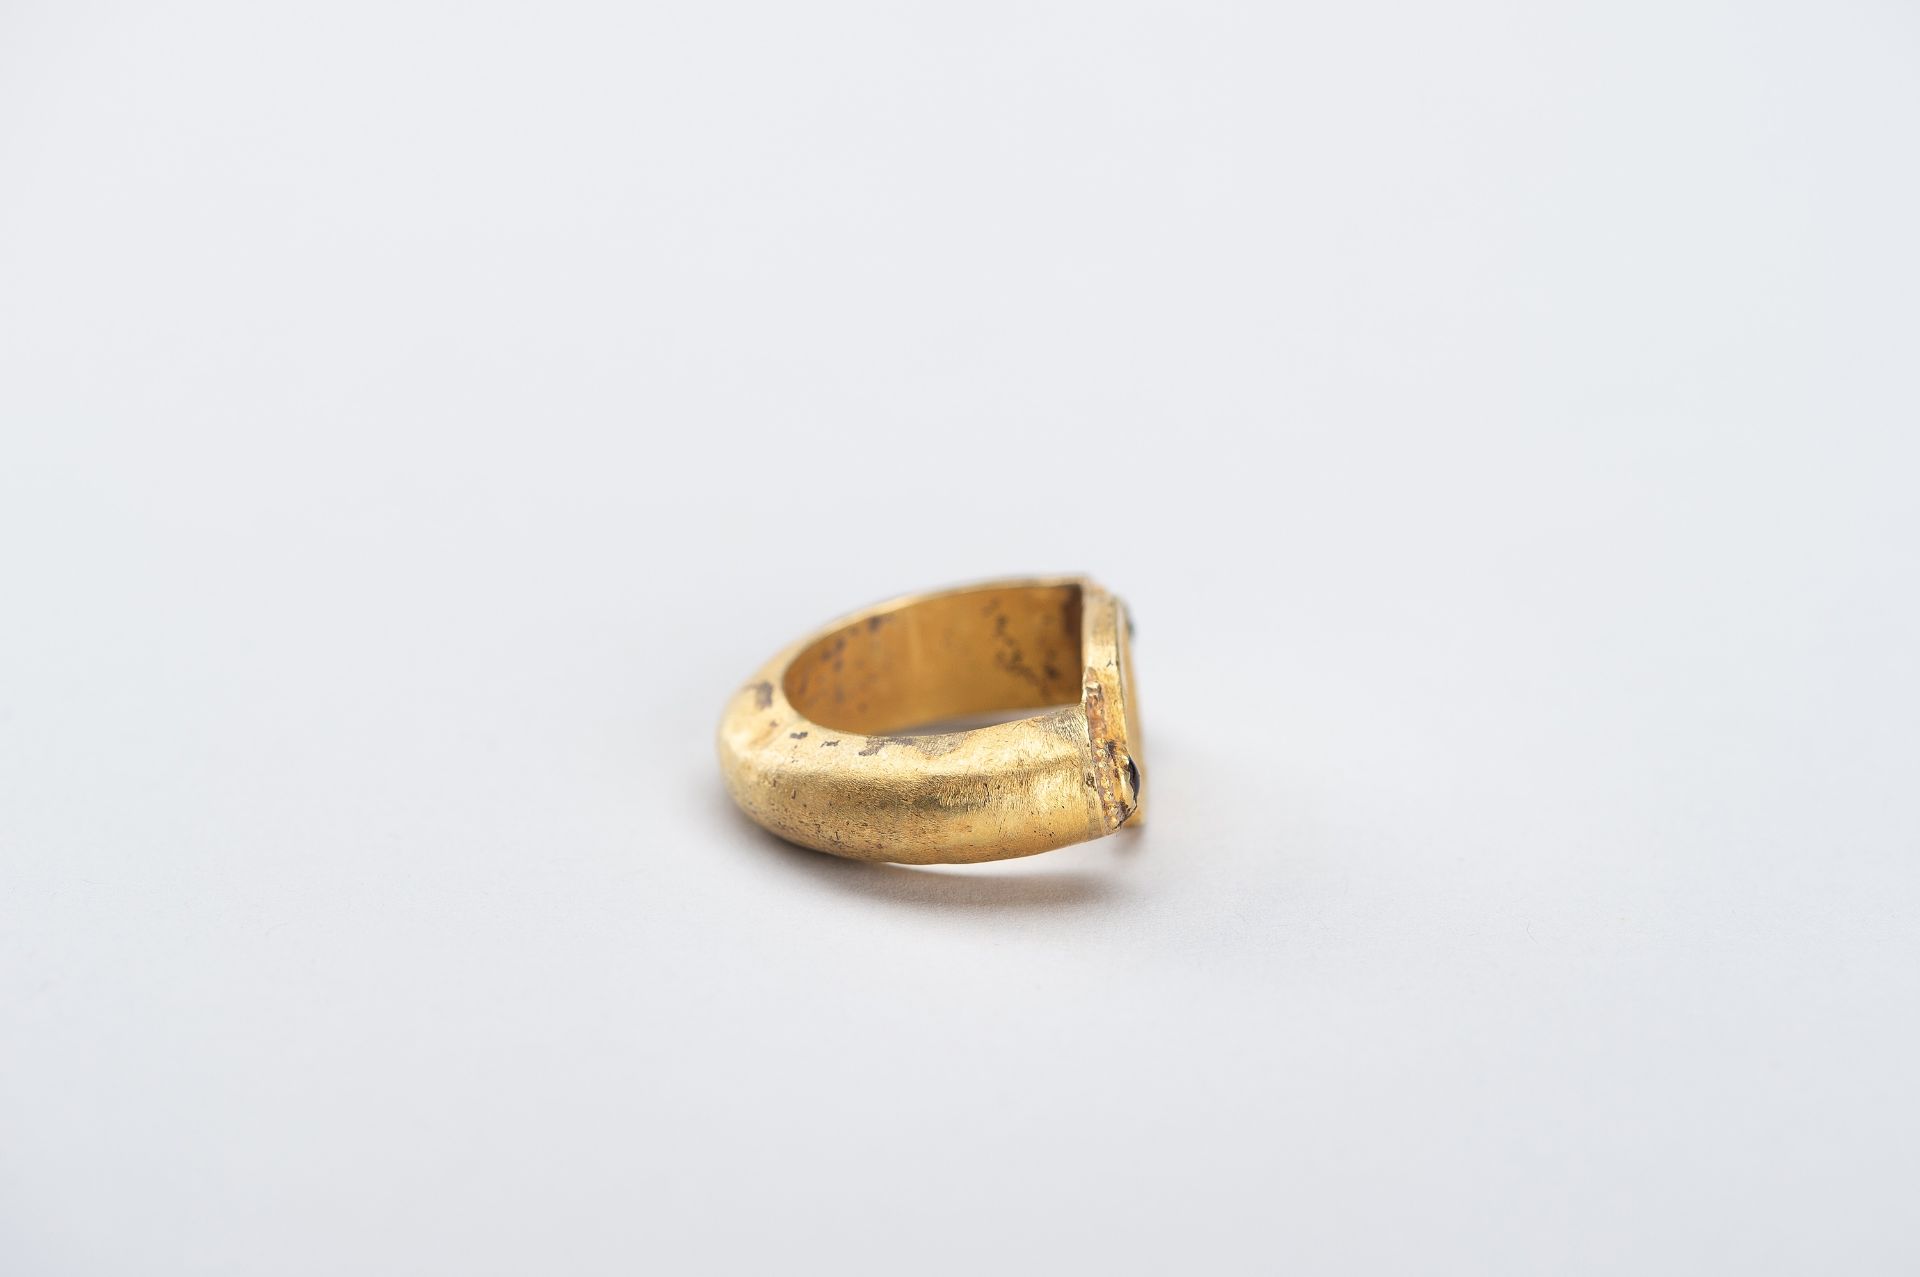 A BACTRIAN INTAGLIO SEAL GOLD RING - Image 6 of 11